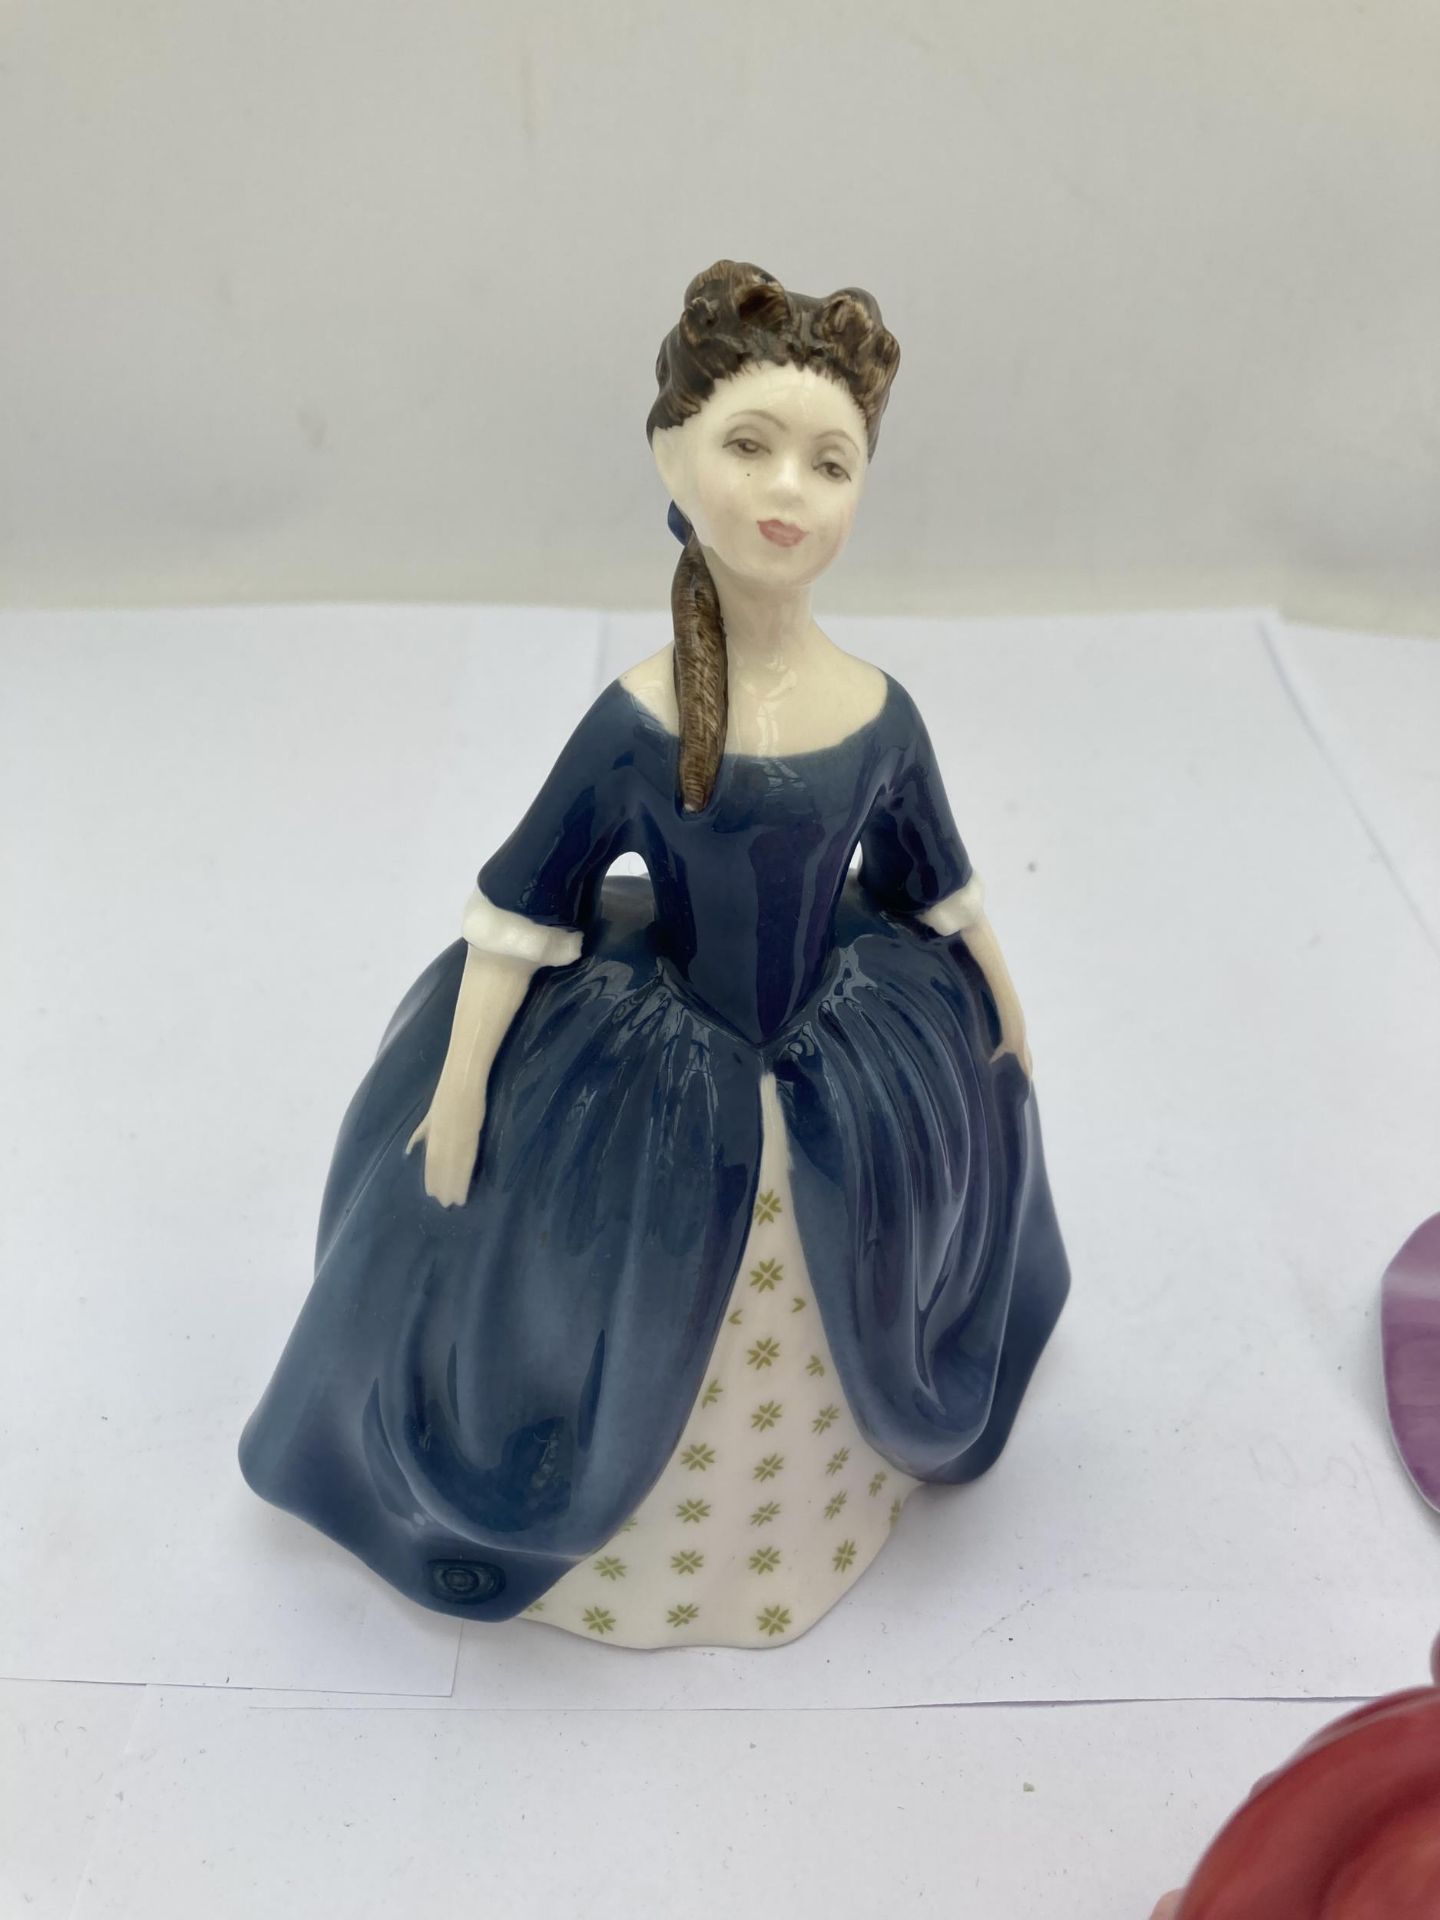 THREE ROYAL DOULTON LADY FIGURES - 'DEBBIE' HN2385, 'VALERIE' HN2107 AND GEMSTONES COLLECTION ' - Image 2 of 5